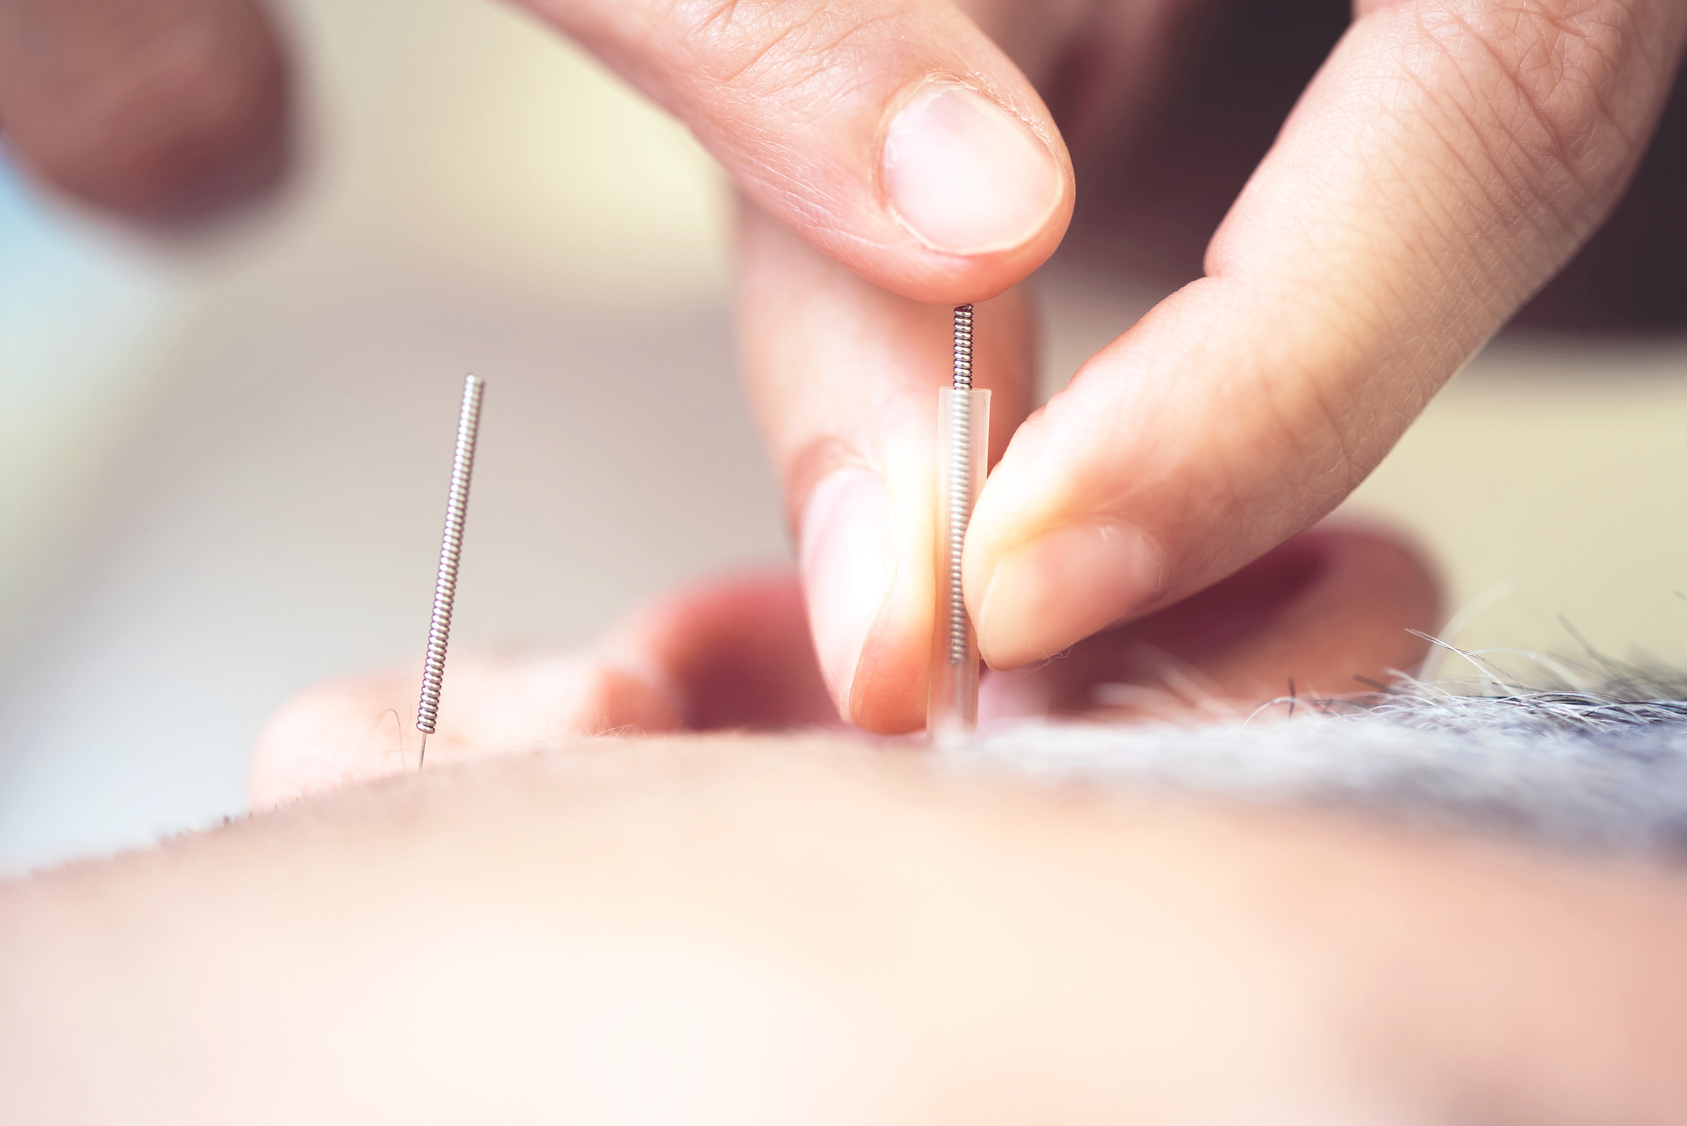 Man on acupuncture